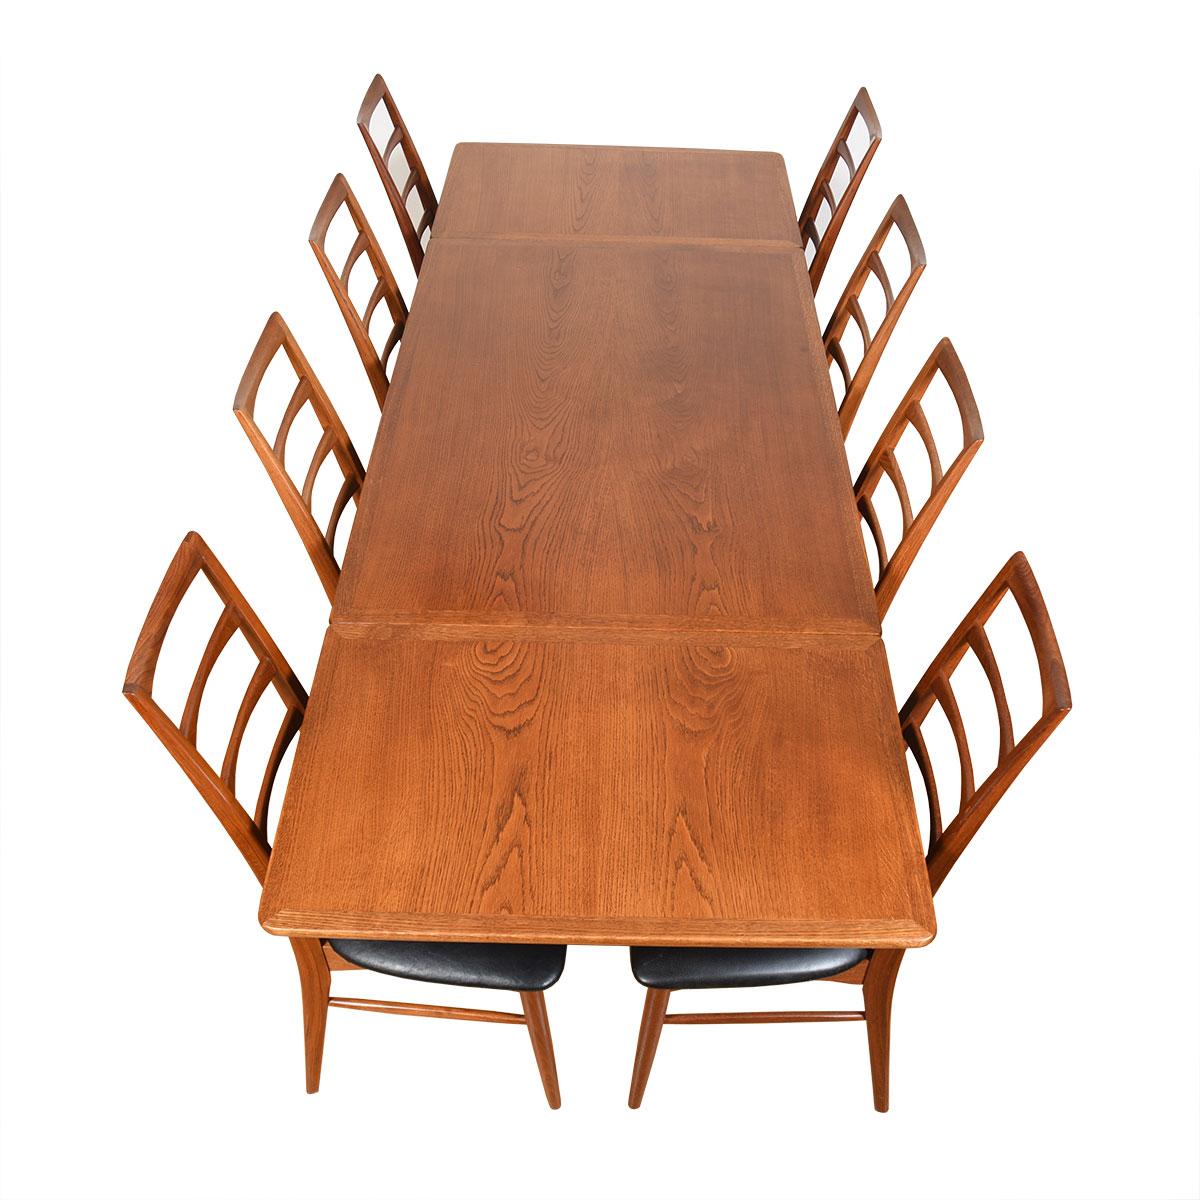 20th Century “Saw Horse” Extendable Dining Table in Oak by Hans Wegner, 1950s For Sale